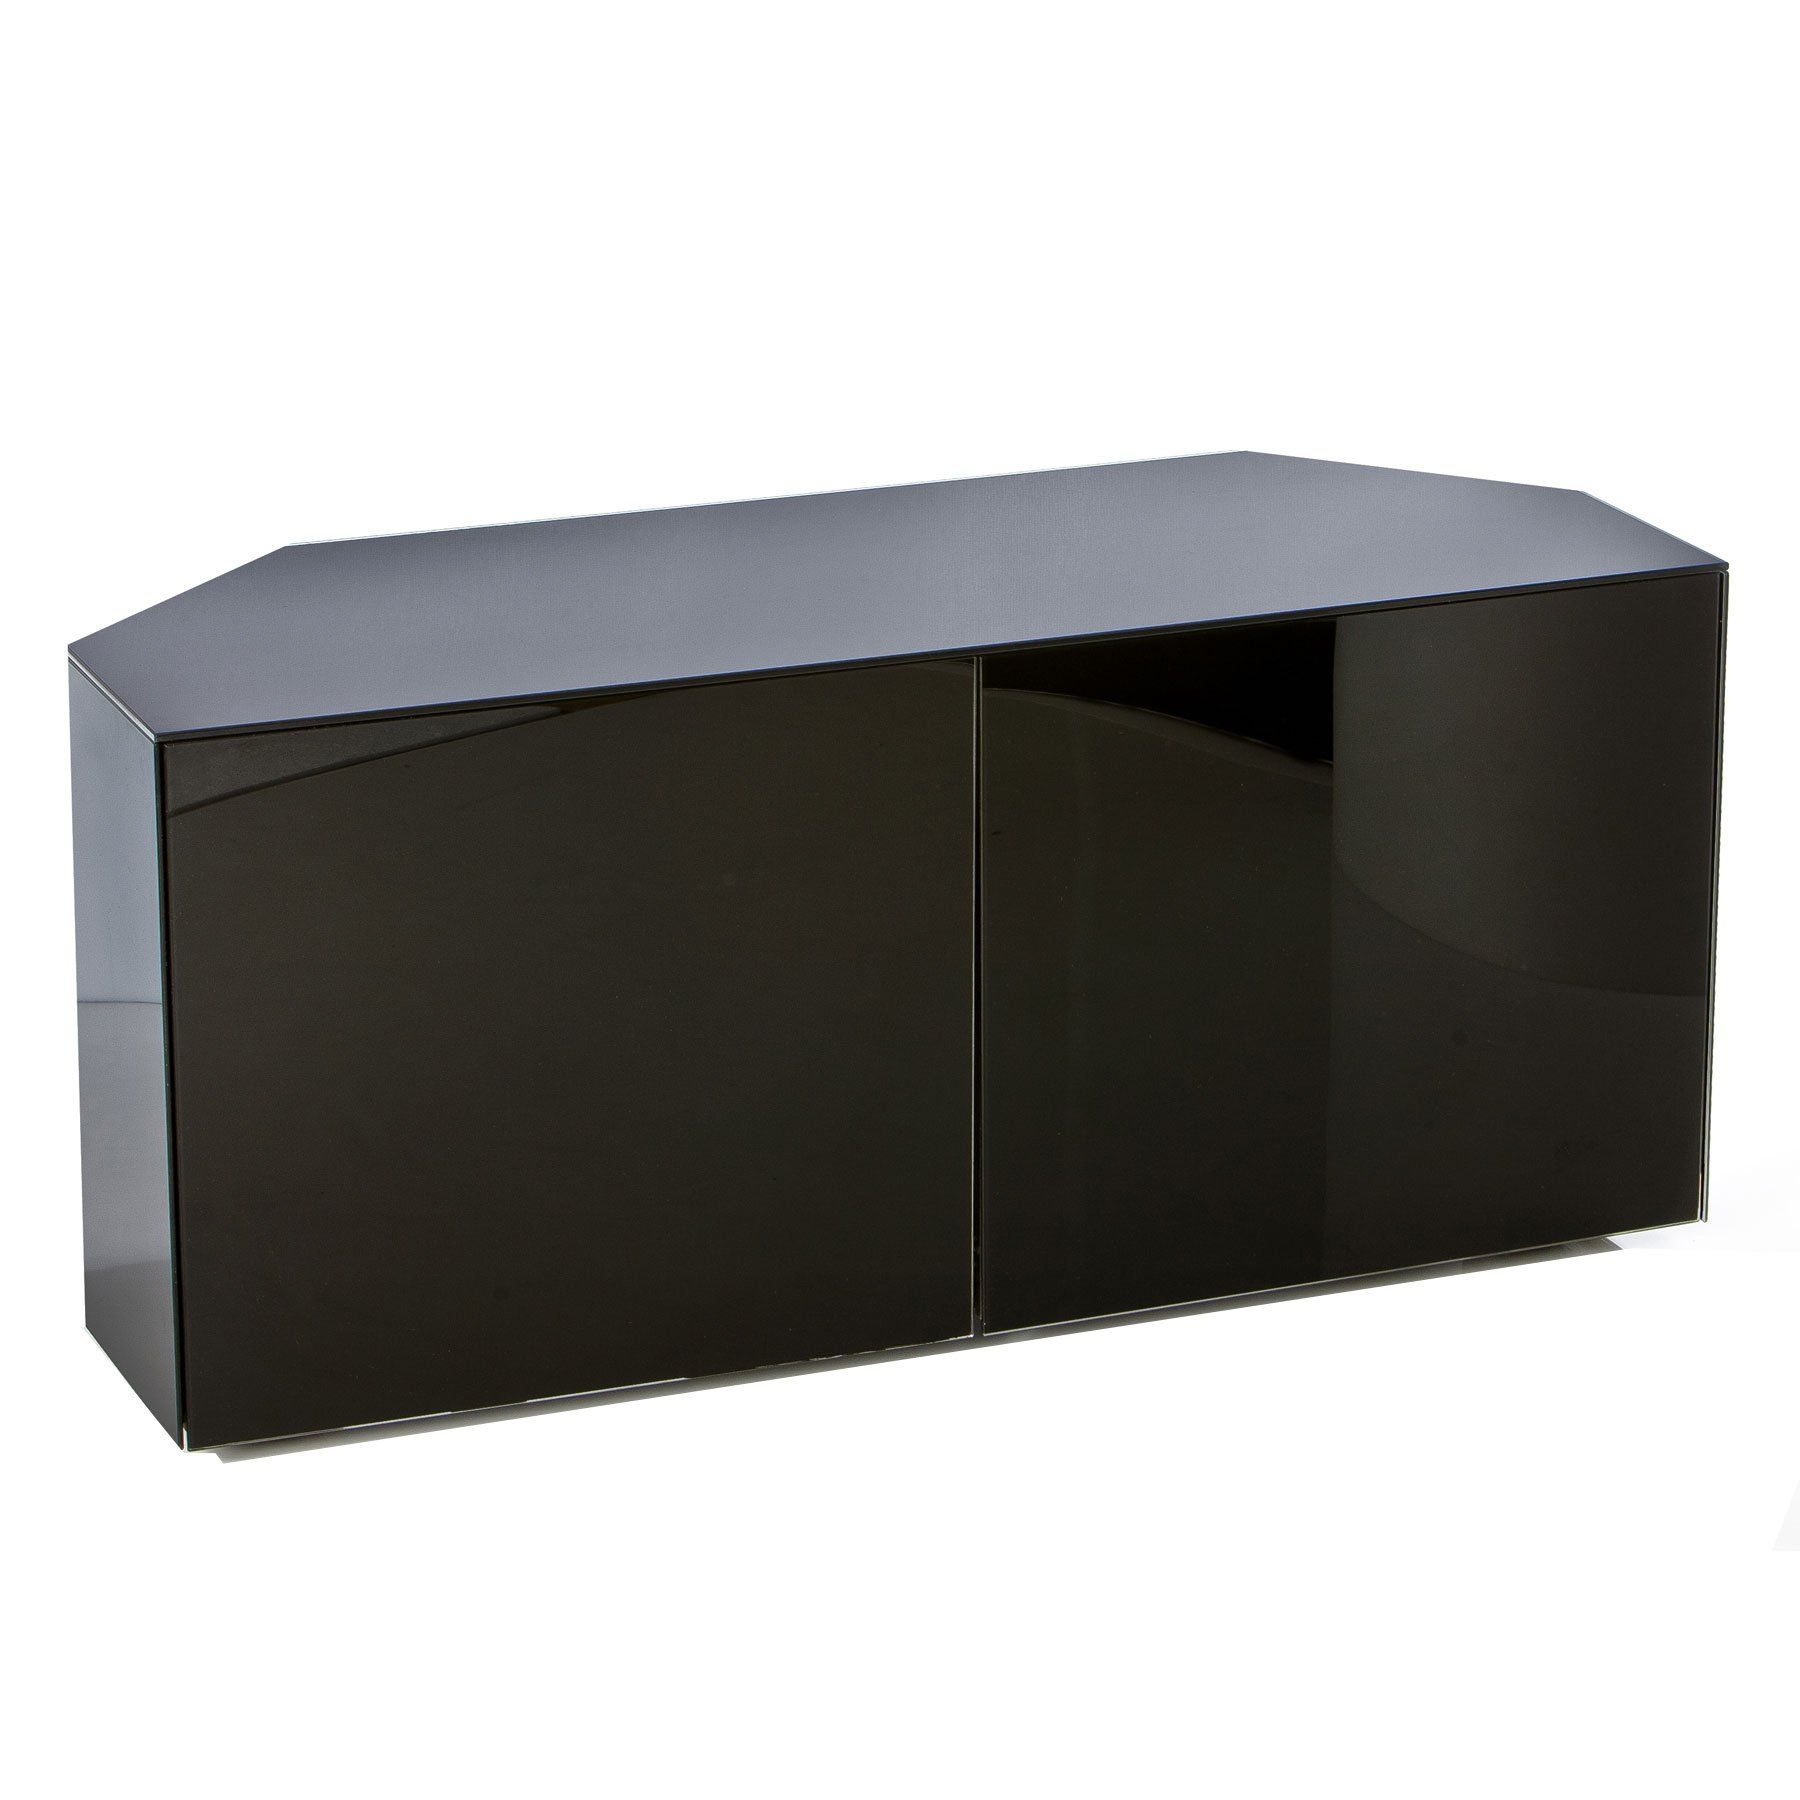 Invictus Black High Gloss Corner Tv Stand For Up To 55" Tvs Regarding Corner Tv Stands For Tvs Up To 43" Black (View 11 of 15)